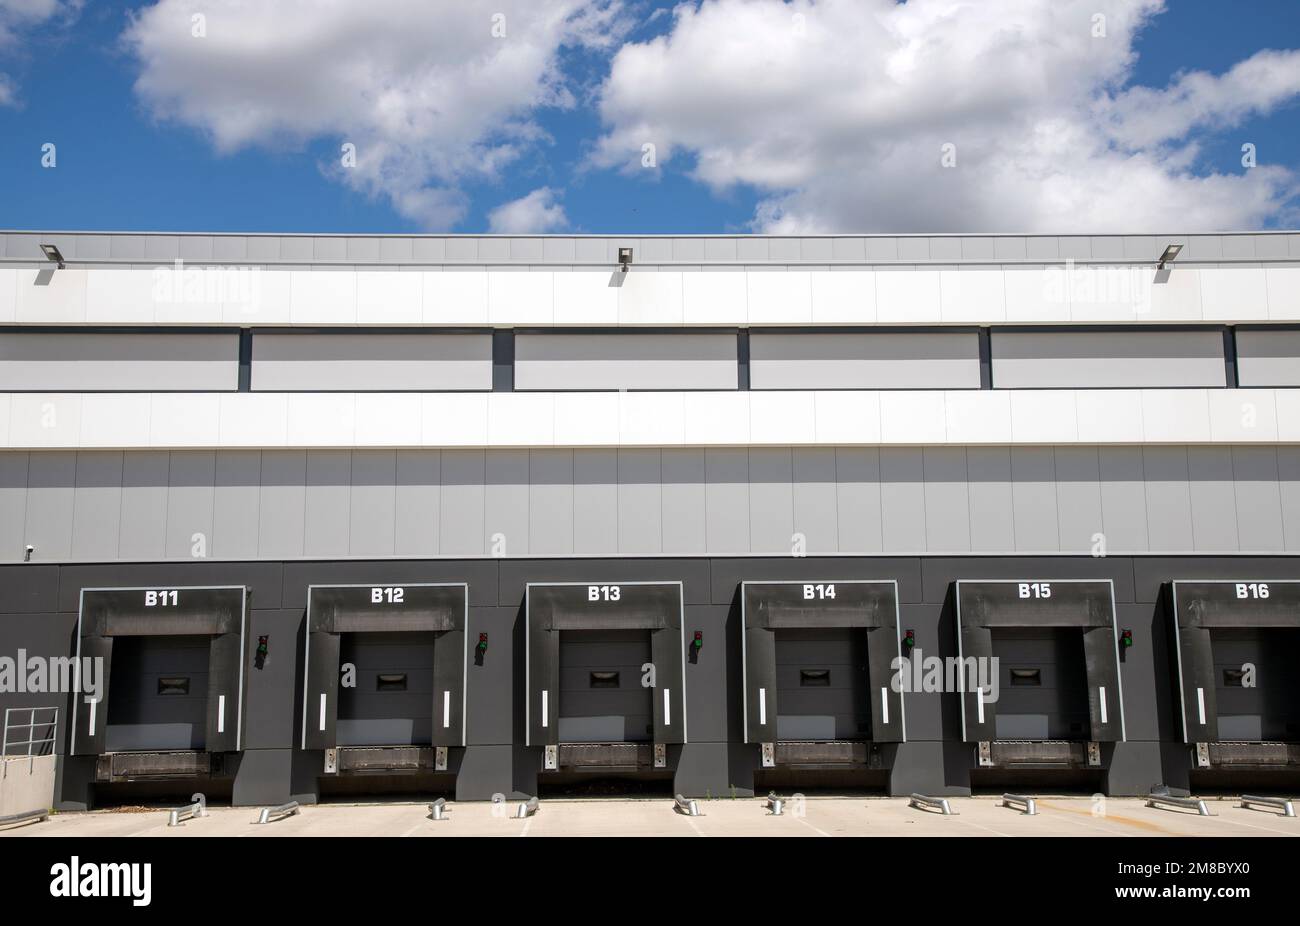 A row of loading docks with shutter doors at a warehouse Stock Photo